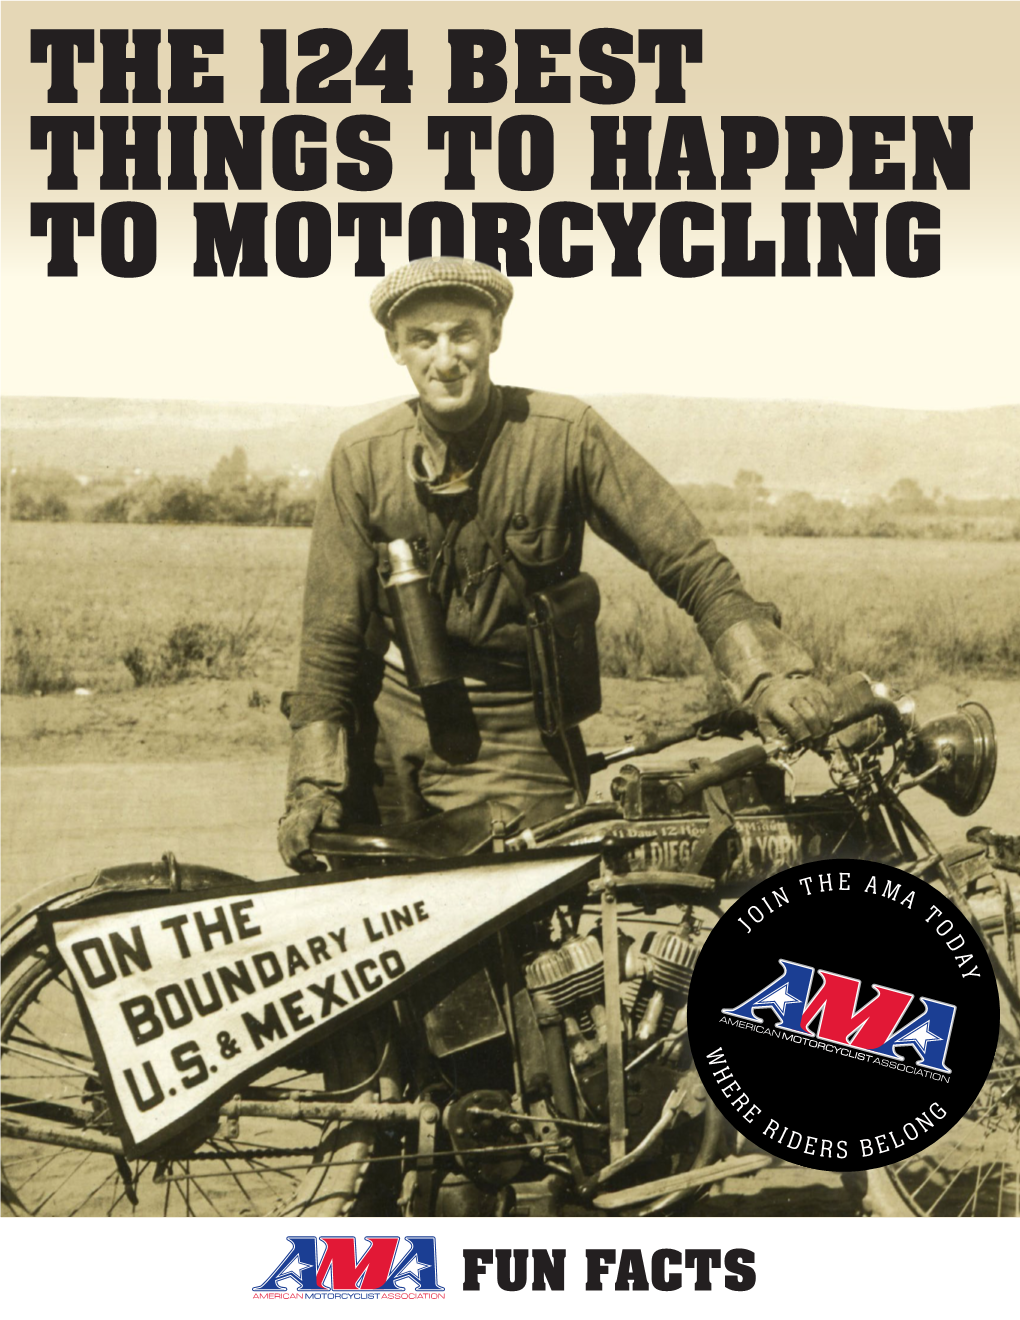 The 124 Best Things to Happen to Motorcycling